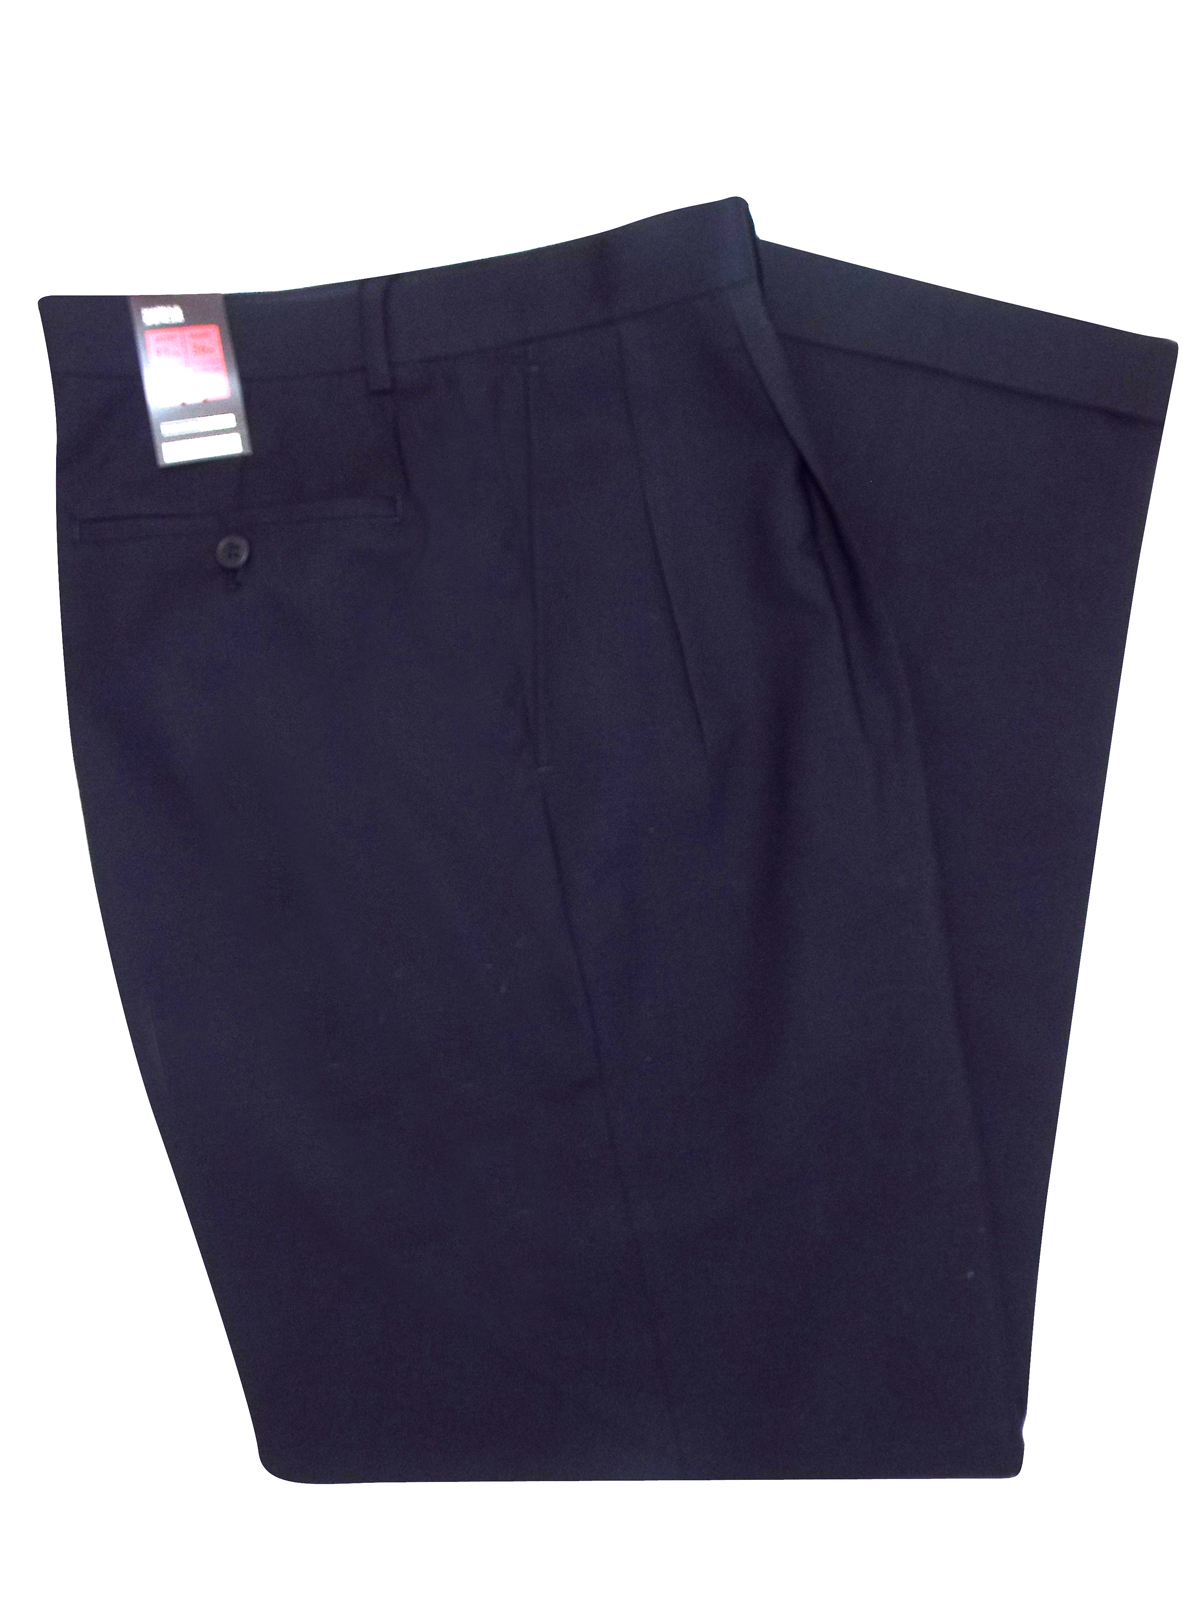 Marks and Spencer - - M&5 NAVY Wool Blend Flat Front Centre Crease ...